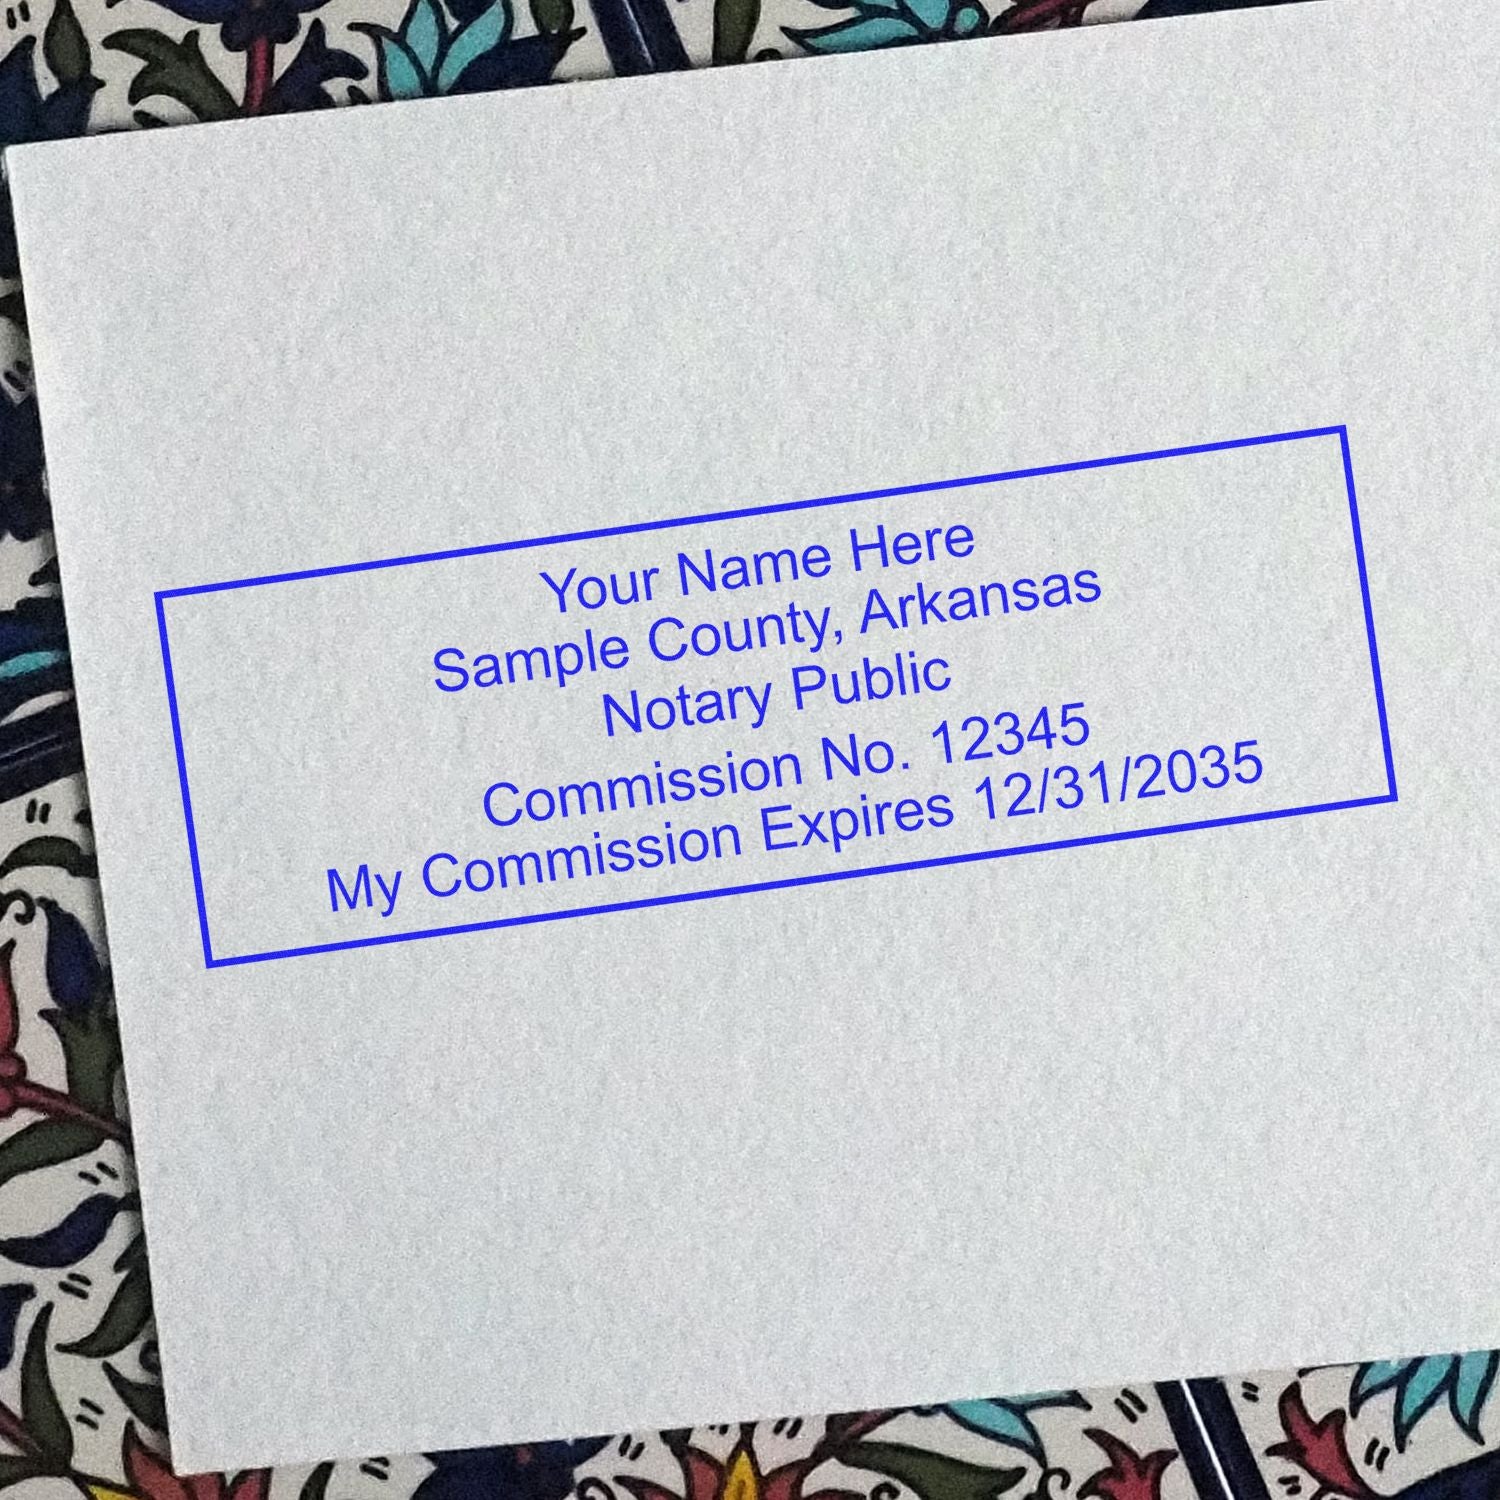 This paper is stamped with a sample imprint of the Slim Pre-Inked Rectangular Notary Stamp for Arkansas, signifying its quality and reliability.